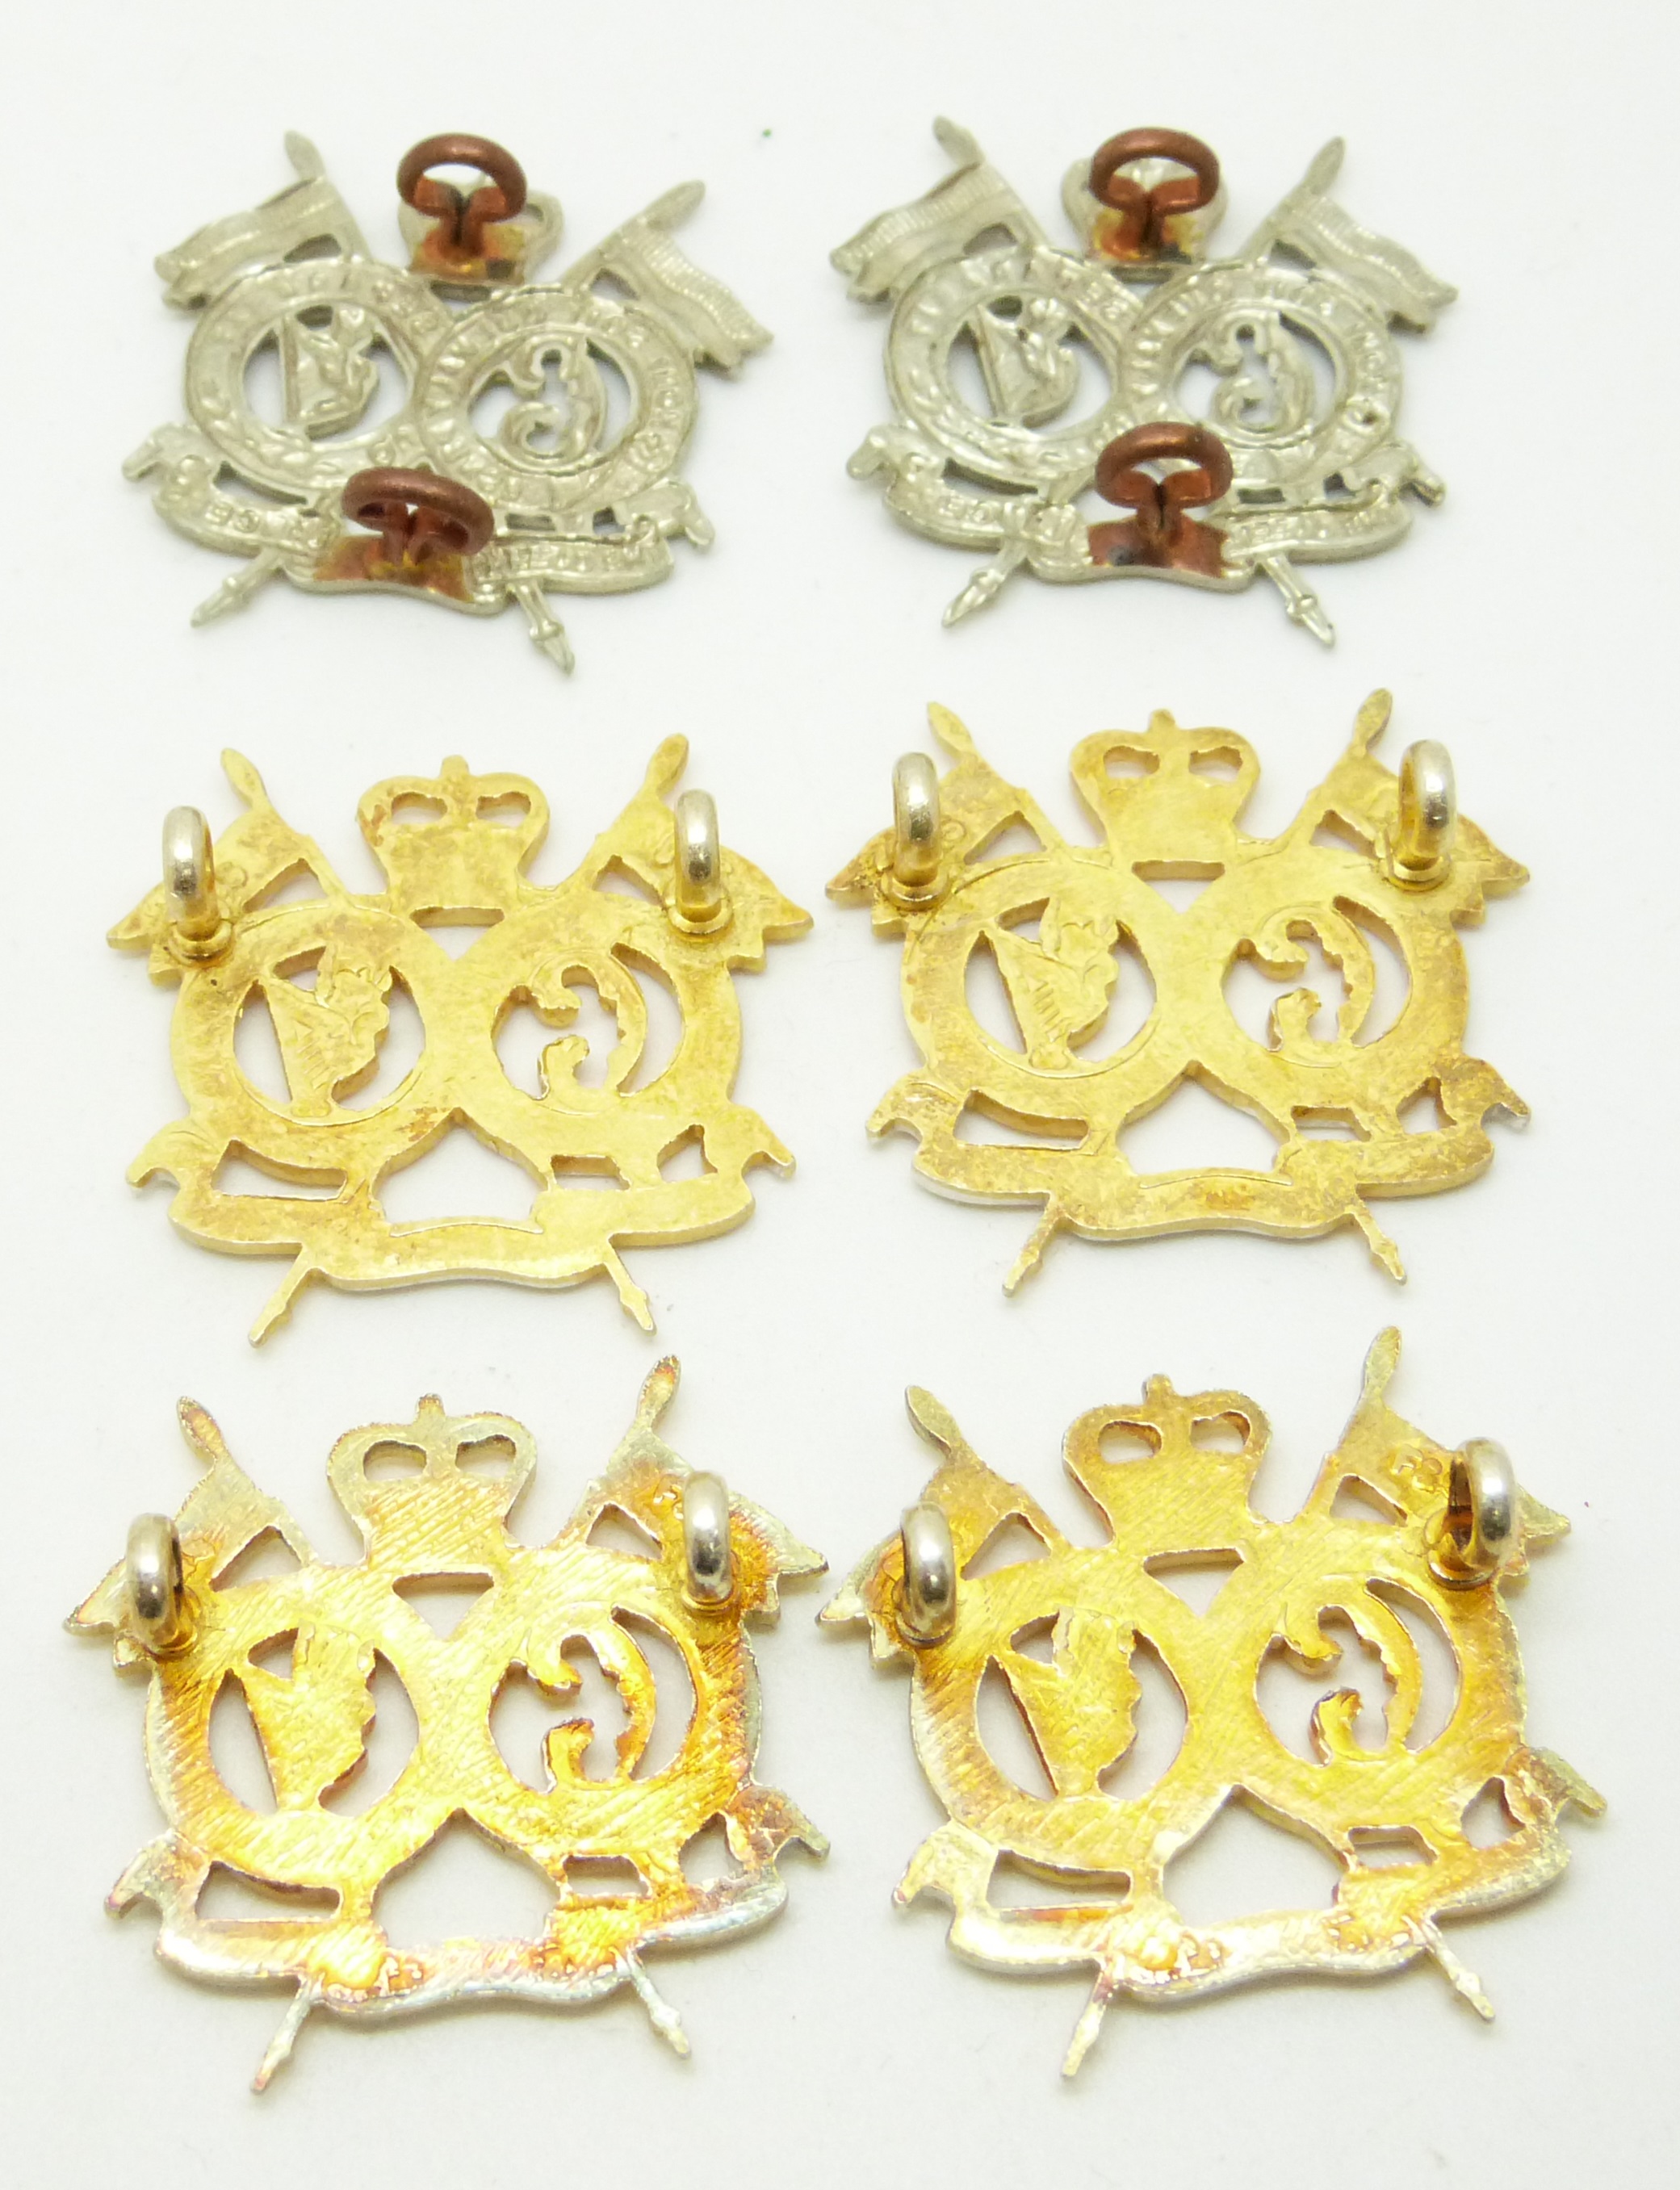 Six British Army 16th/5th Lancers metal collar badges in three pairs, post 1954 Queen Elizabeth - Image 2 of 2